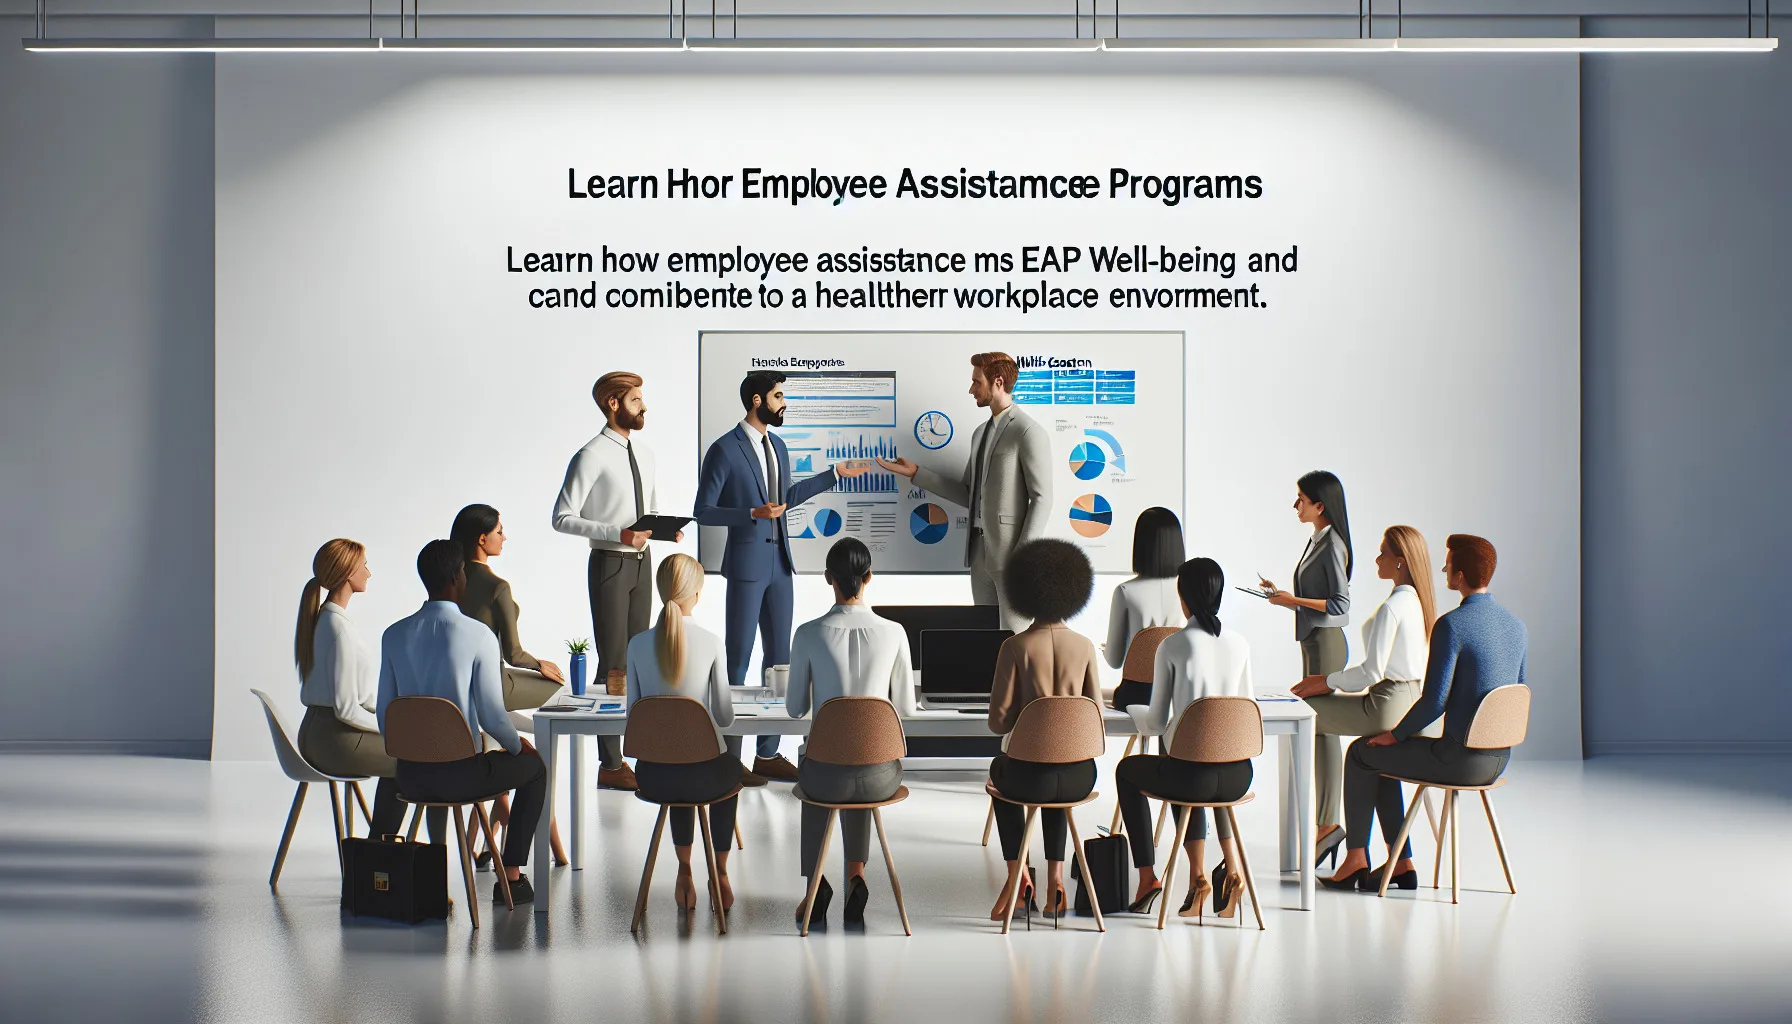 Learn how EAPs can support employee well-being and contribute to a healthier workplace environment.